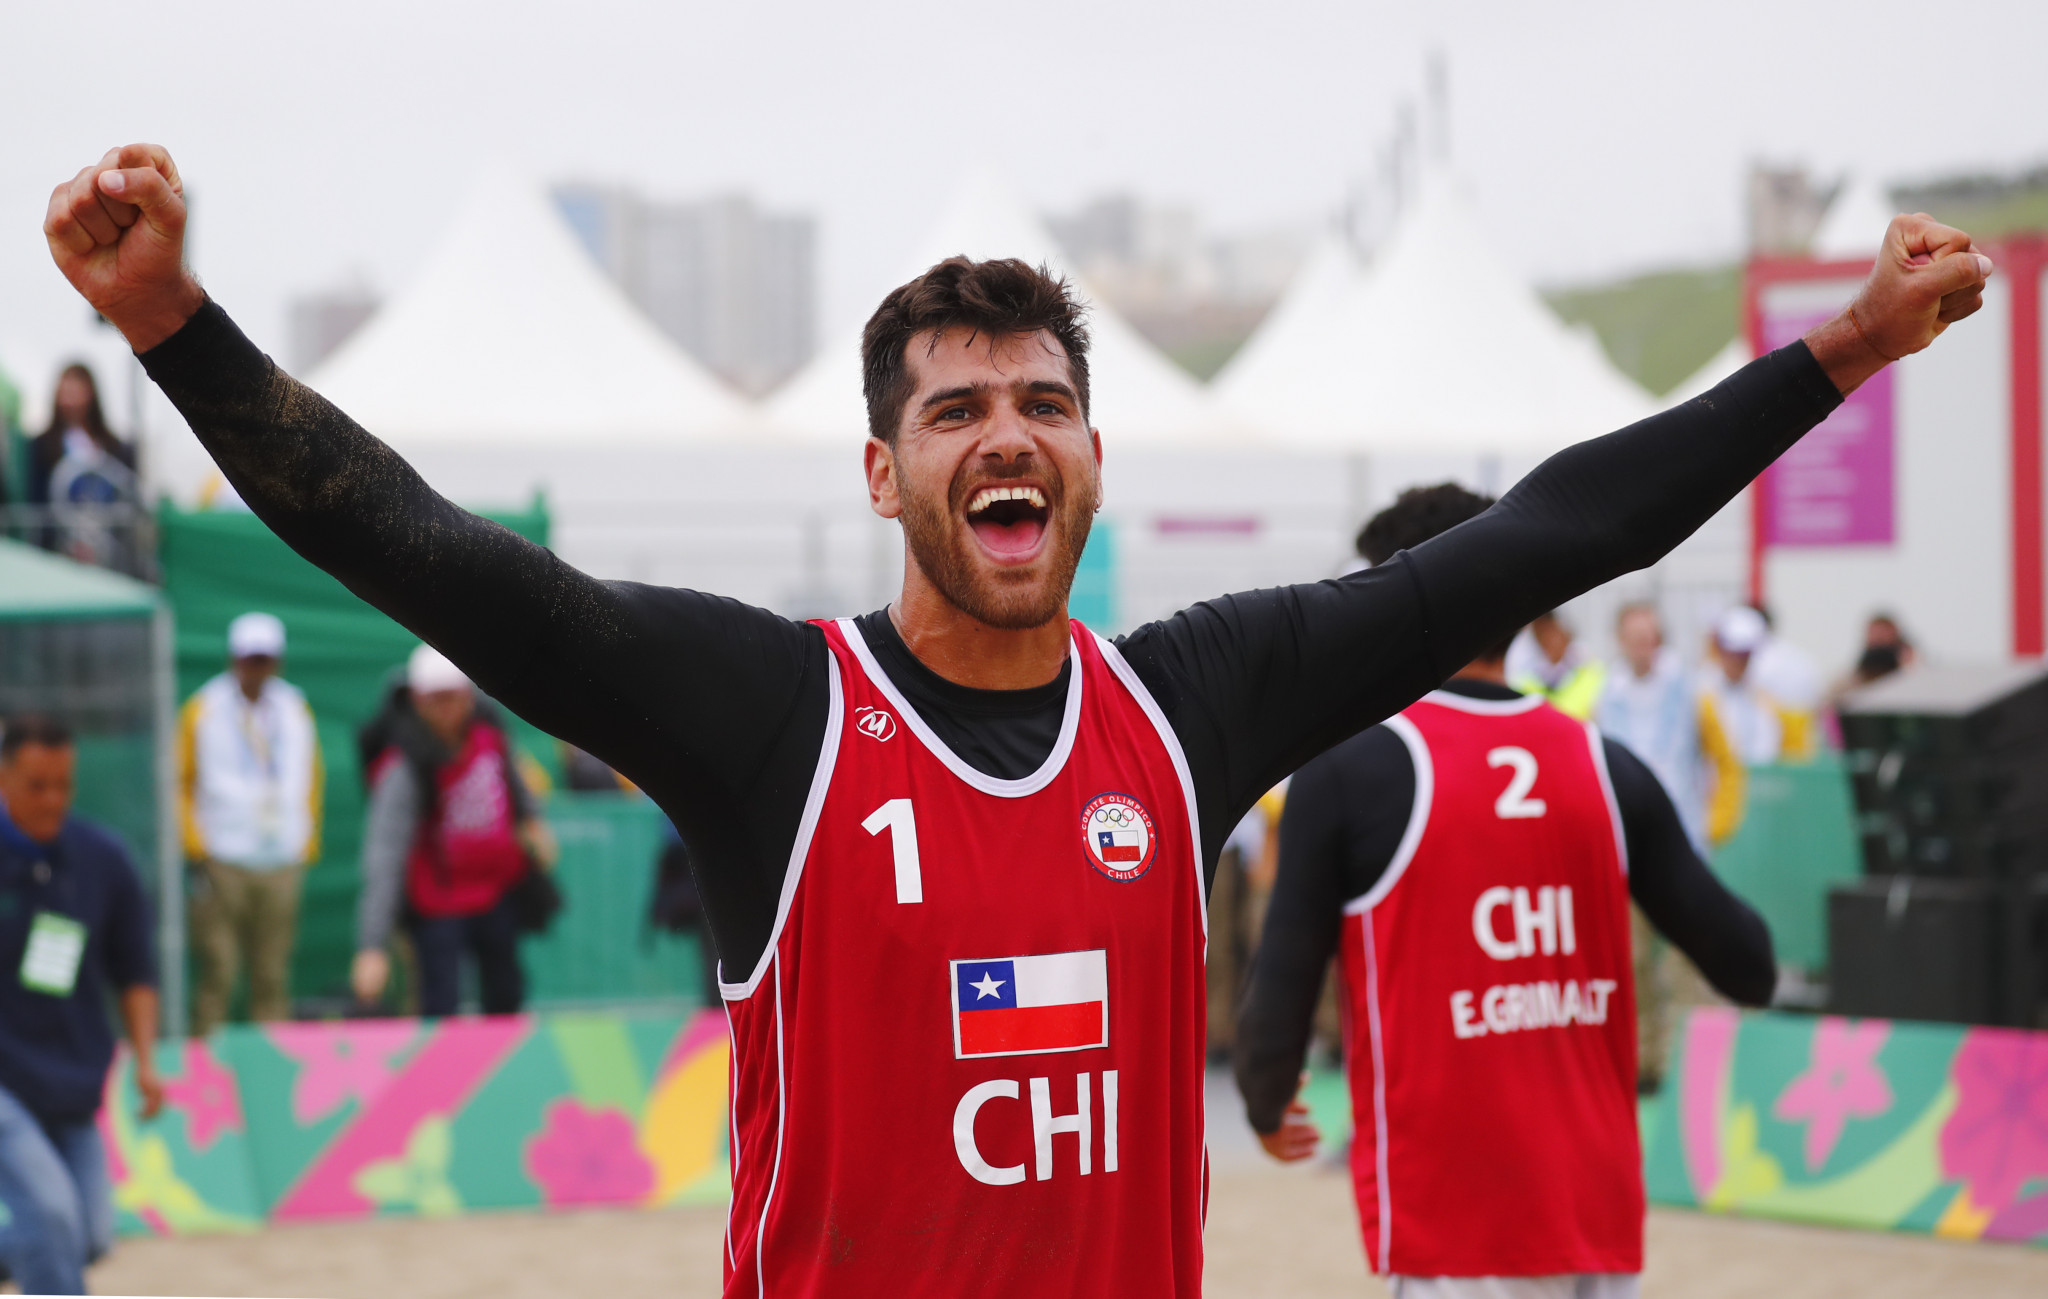 Chilean cousins Marco and Esteban Grimalt then triumphed in the men's beach volleyball ©Lima 2019